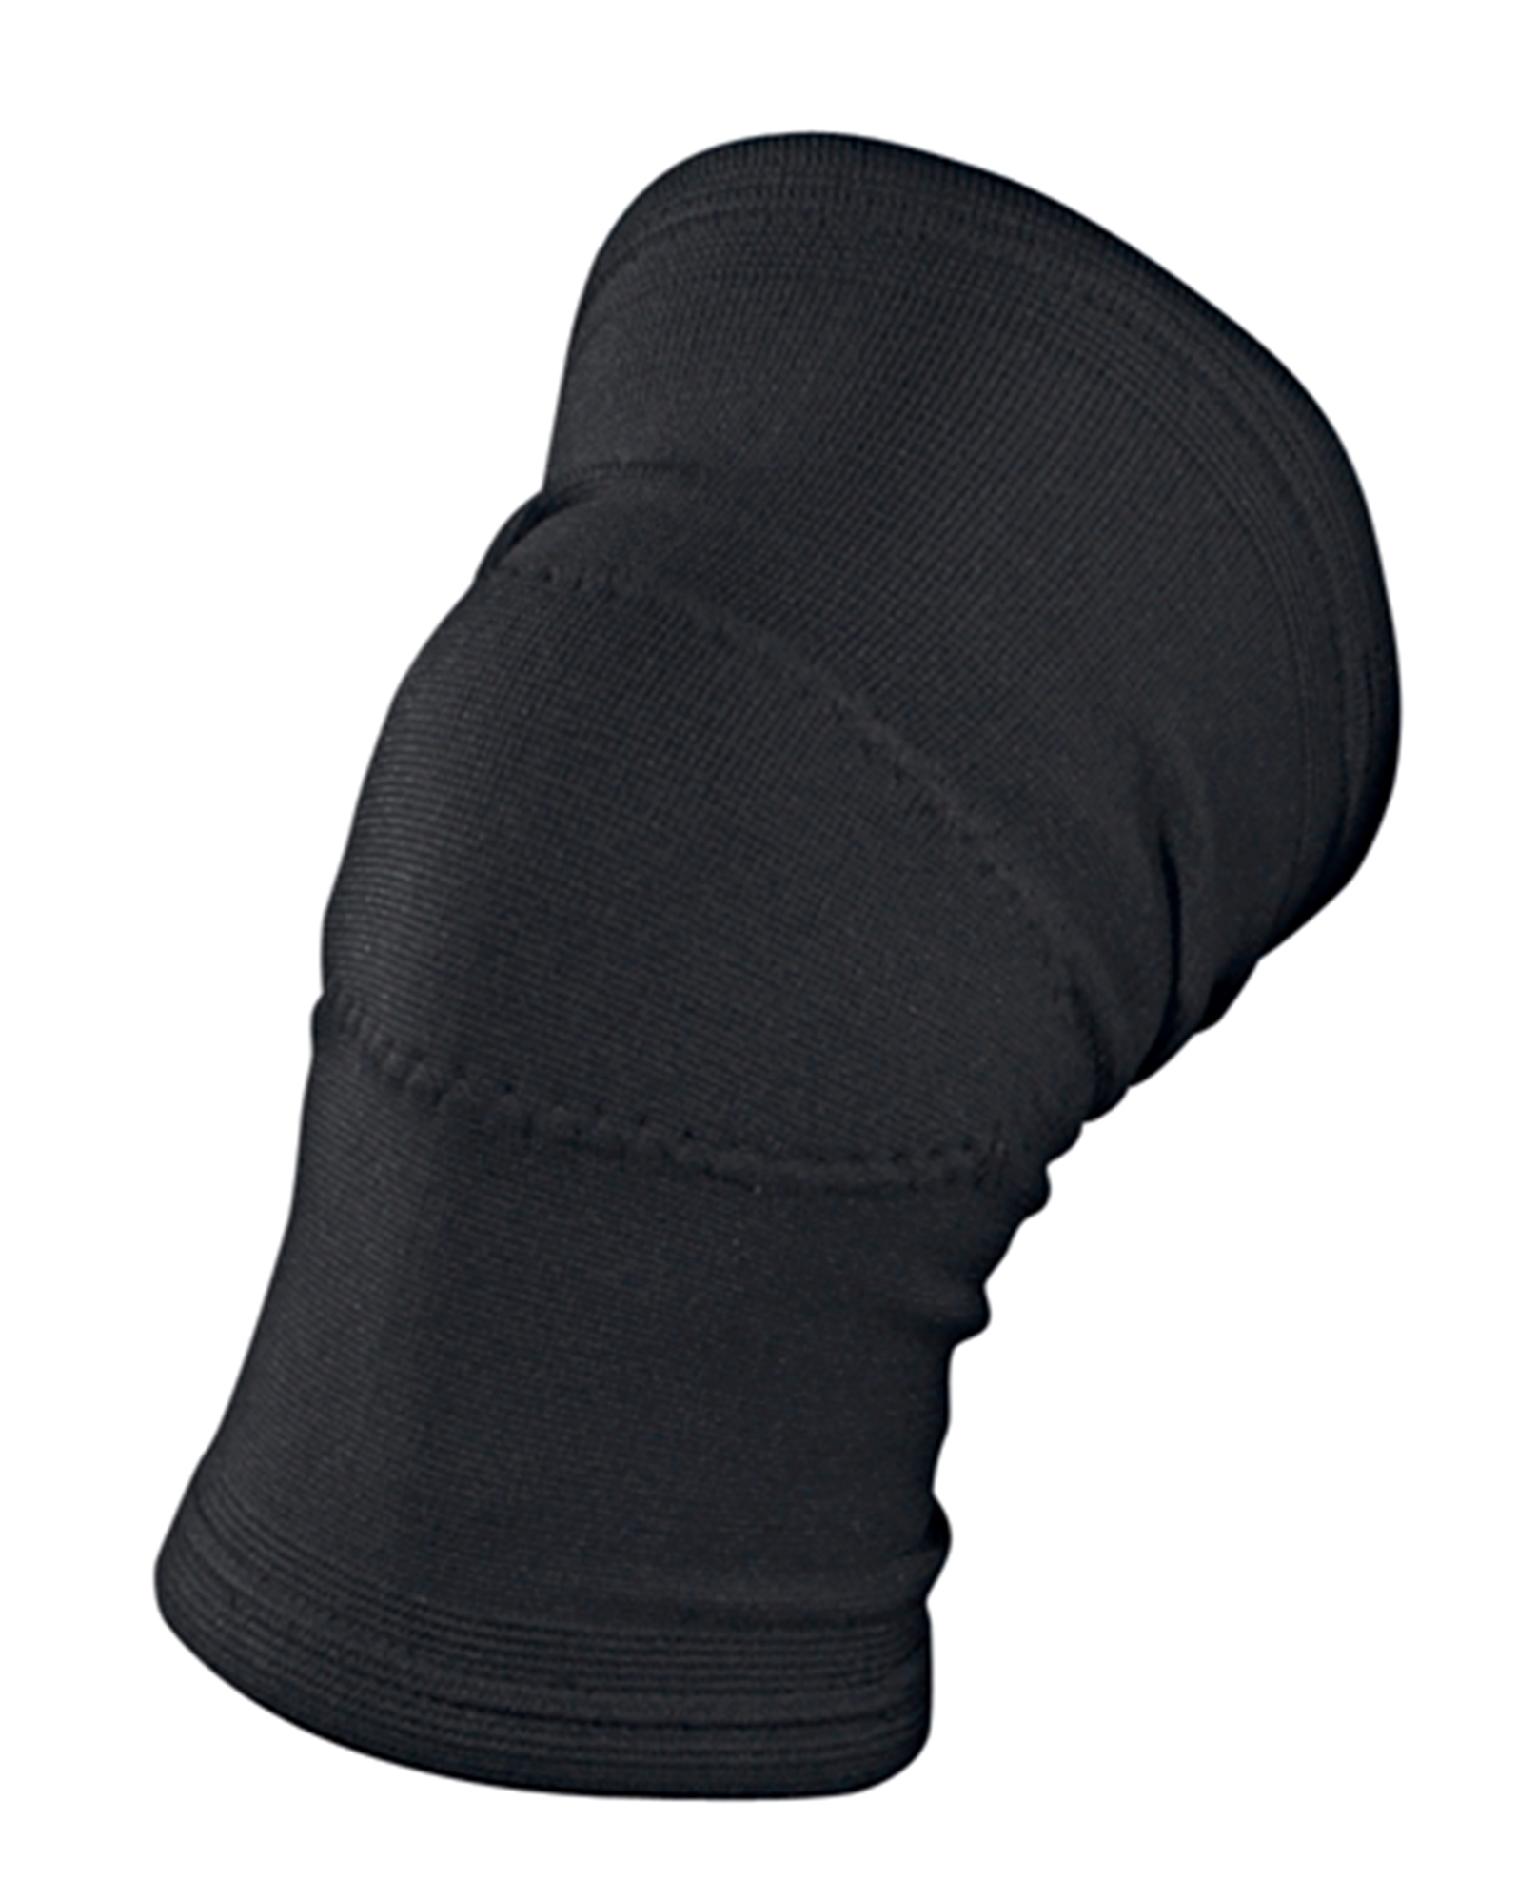 Ace Compression Knee Support - S/M